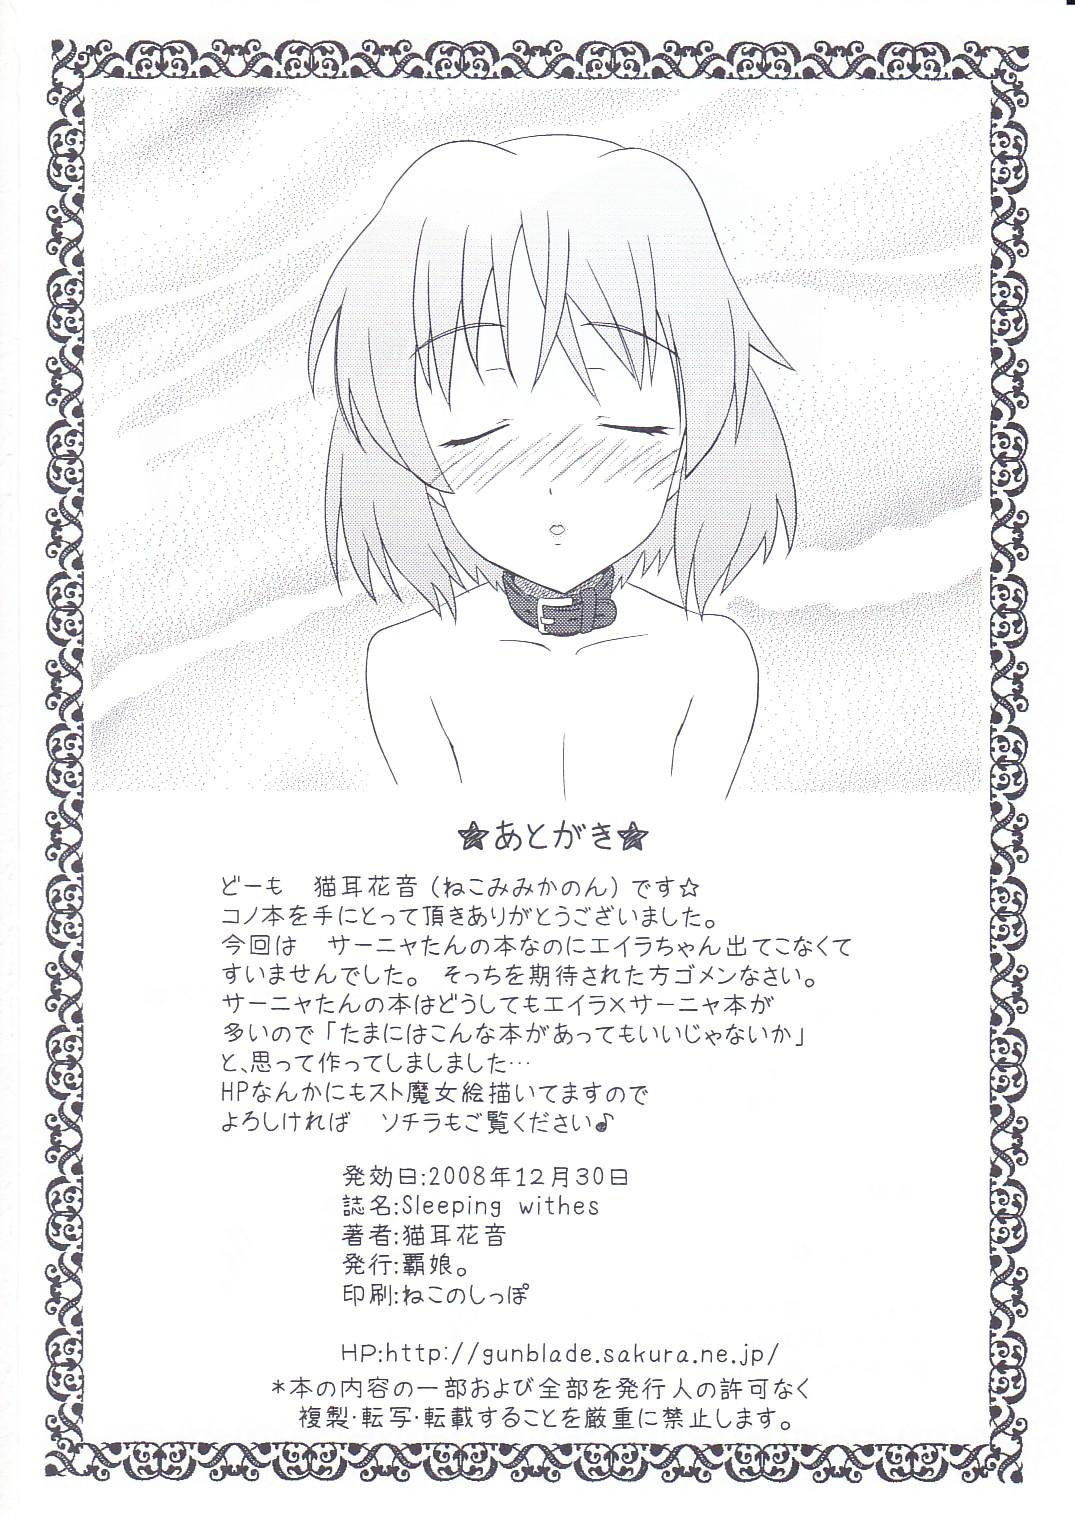 Stepfamily Sleeping witches - Strike witches Amature - Page 33